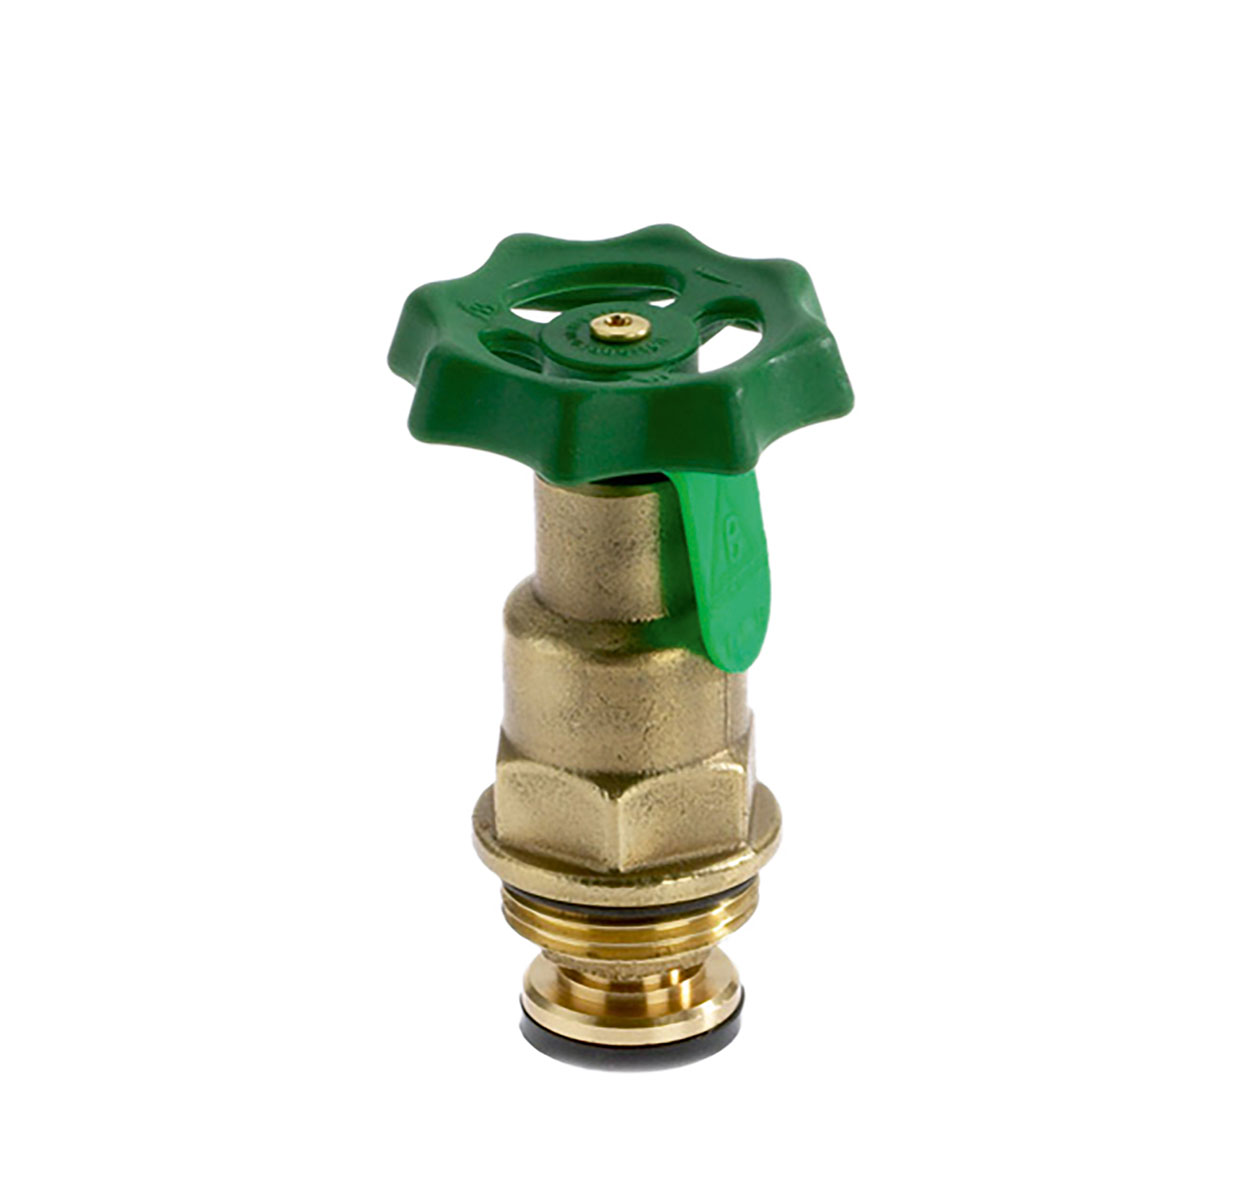 1215650 - Brass Upper-part with grease chamber for Combined Free-flow and Backflow-preventer valves, not-rising spindle